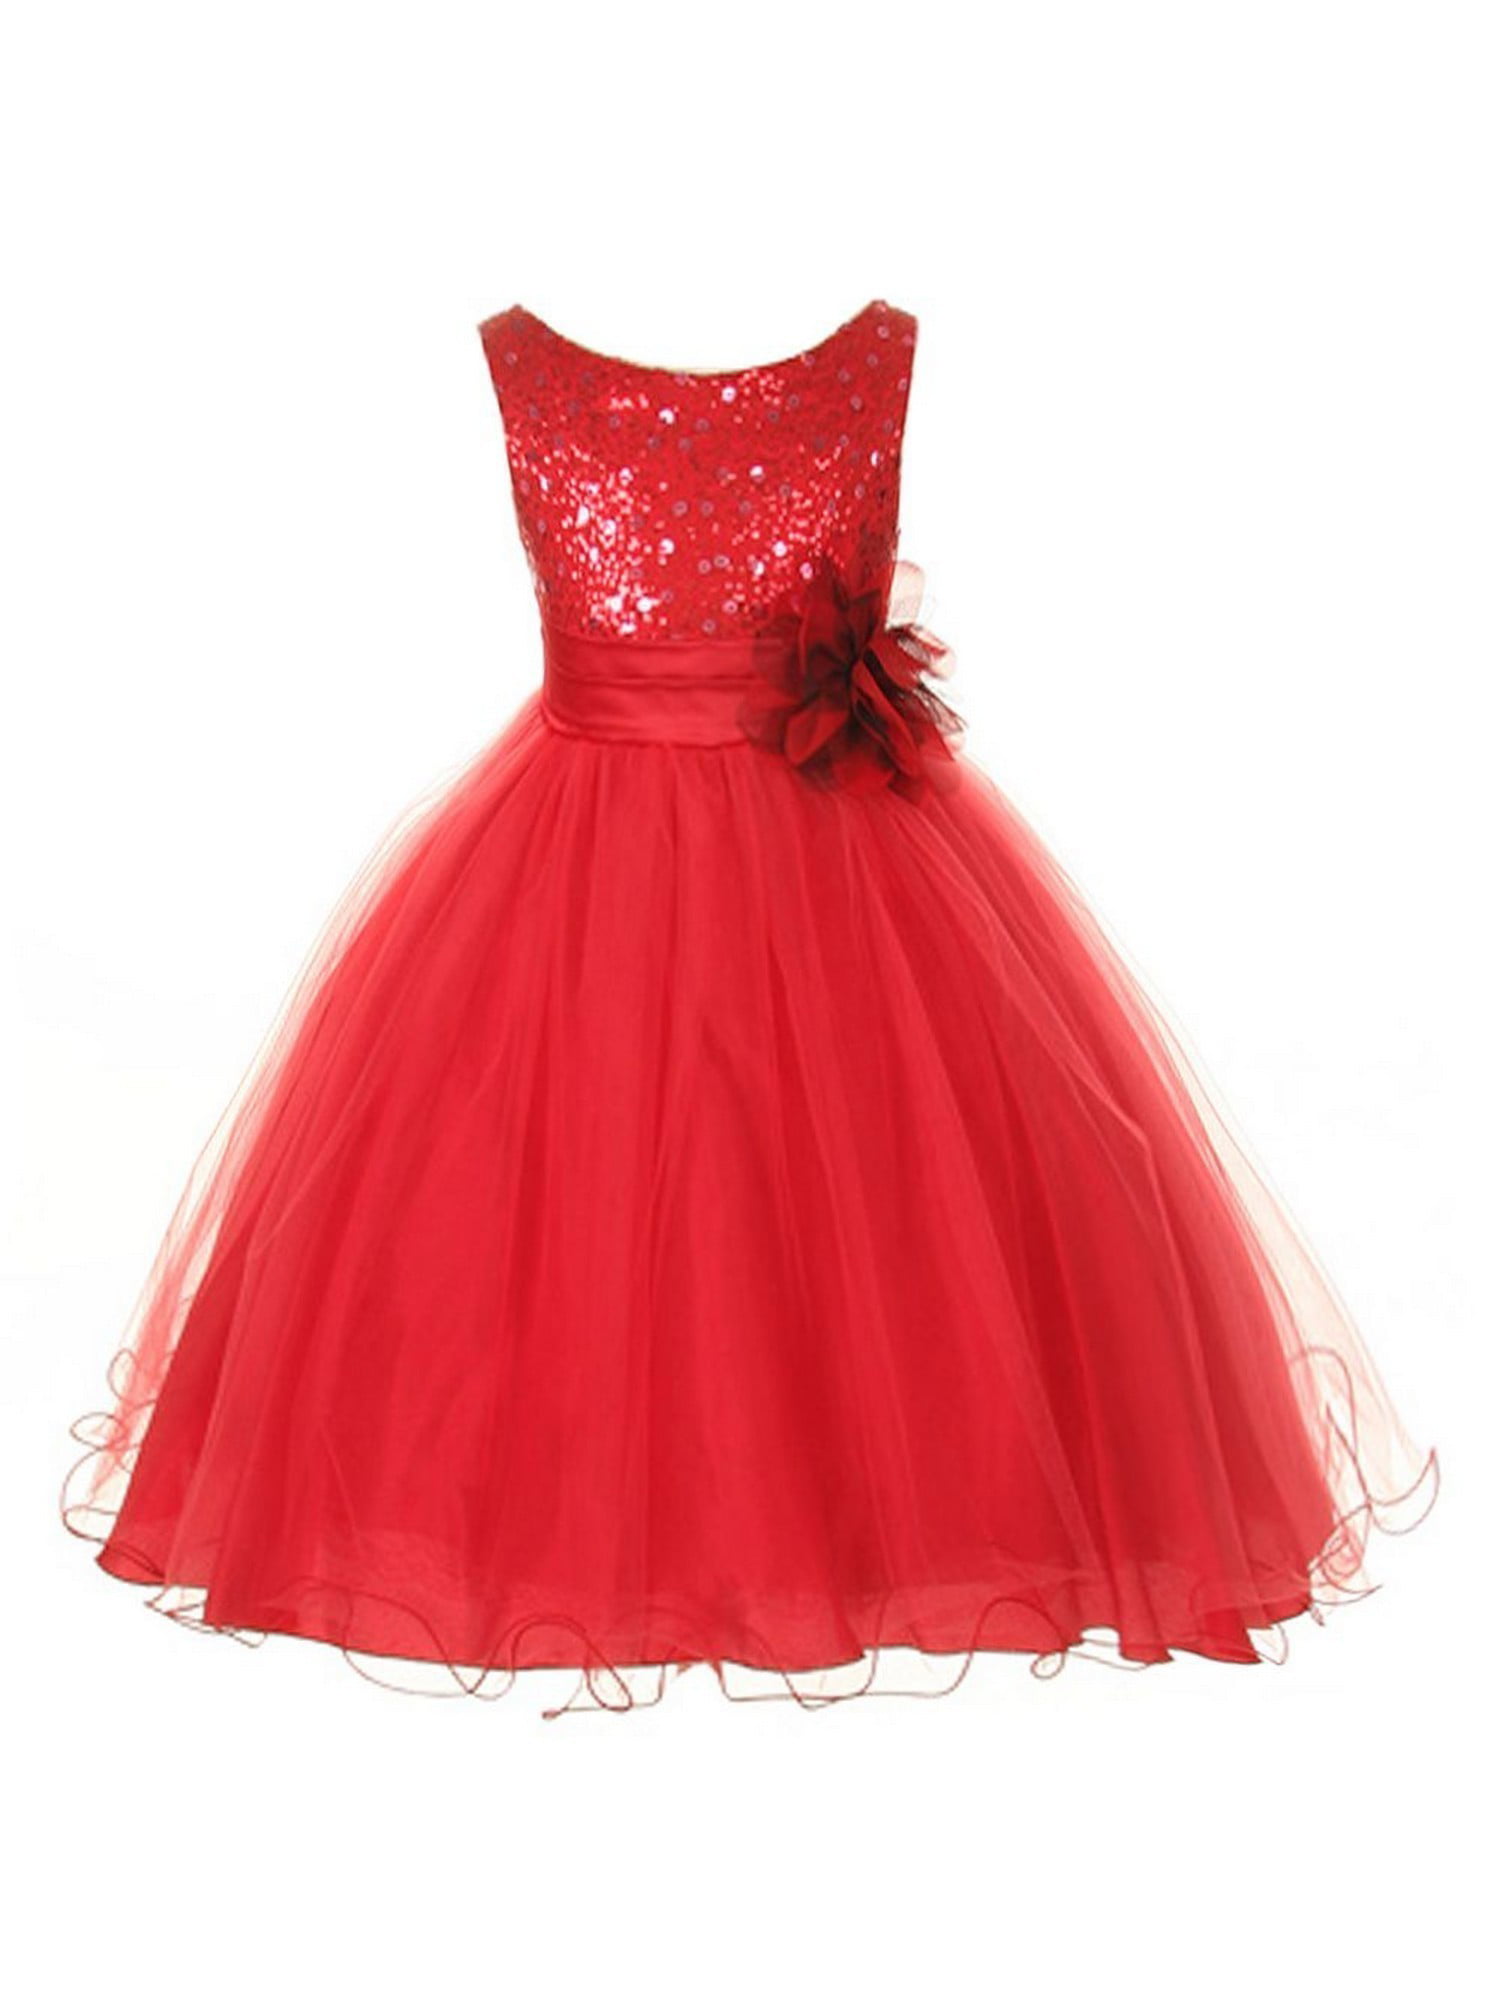 Kids Dream - Kids Dream Girls Red Sequin Illusion Tulle Plus Size Party ...